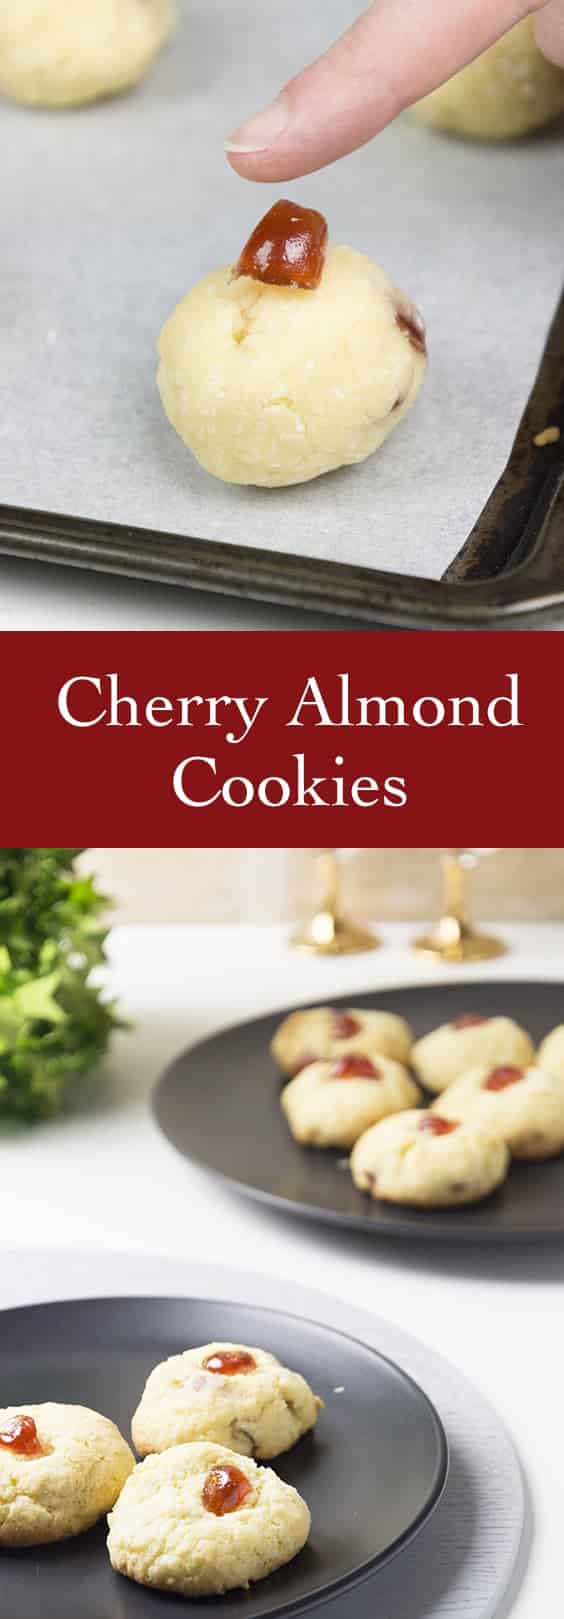 Recipe for Cherry Almond Christmas Cookies is a delicious cookie recipe to add to your holiday baking list. These are great for neighbor gifts as well.